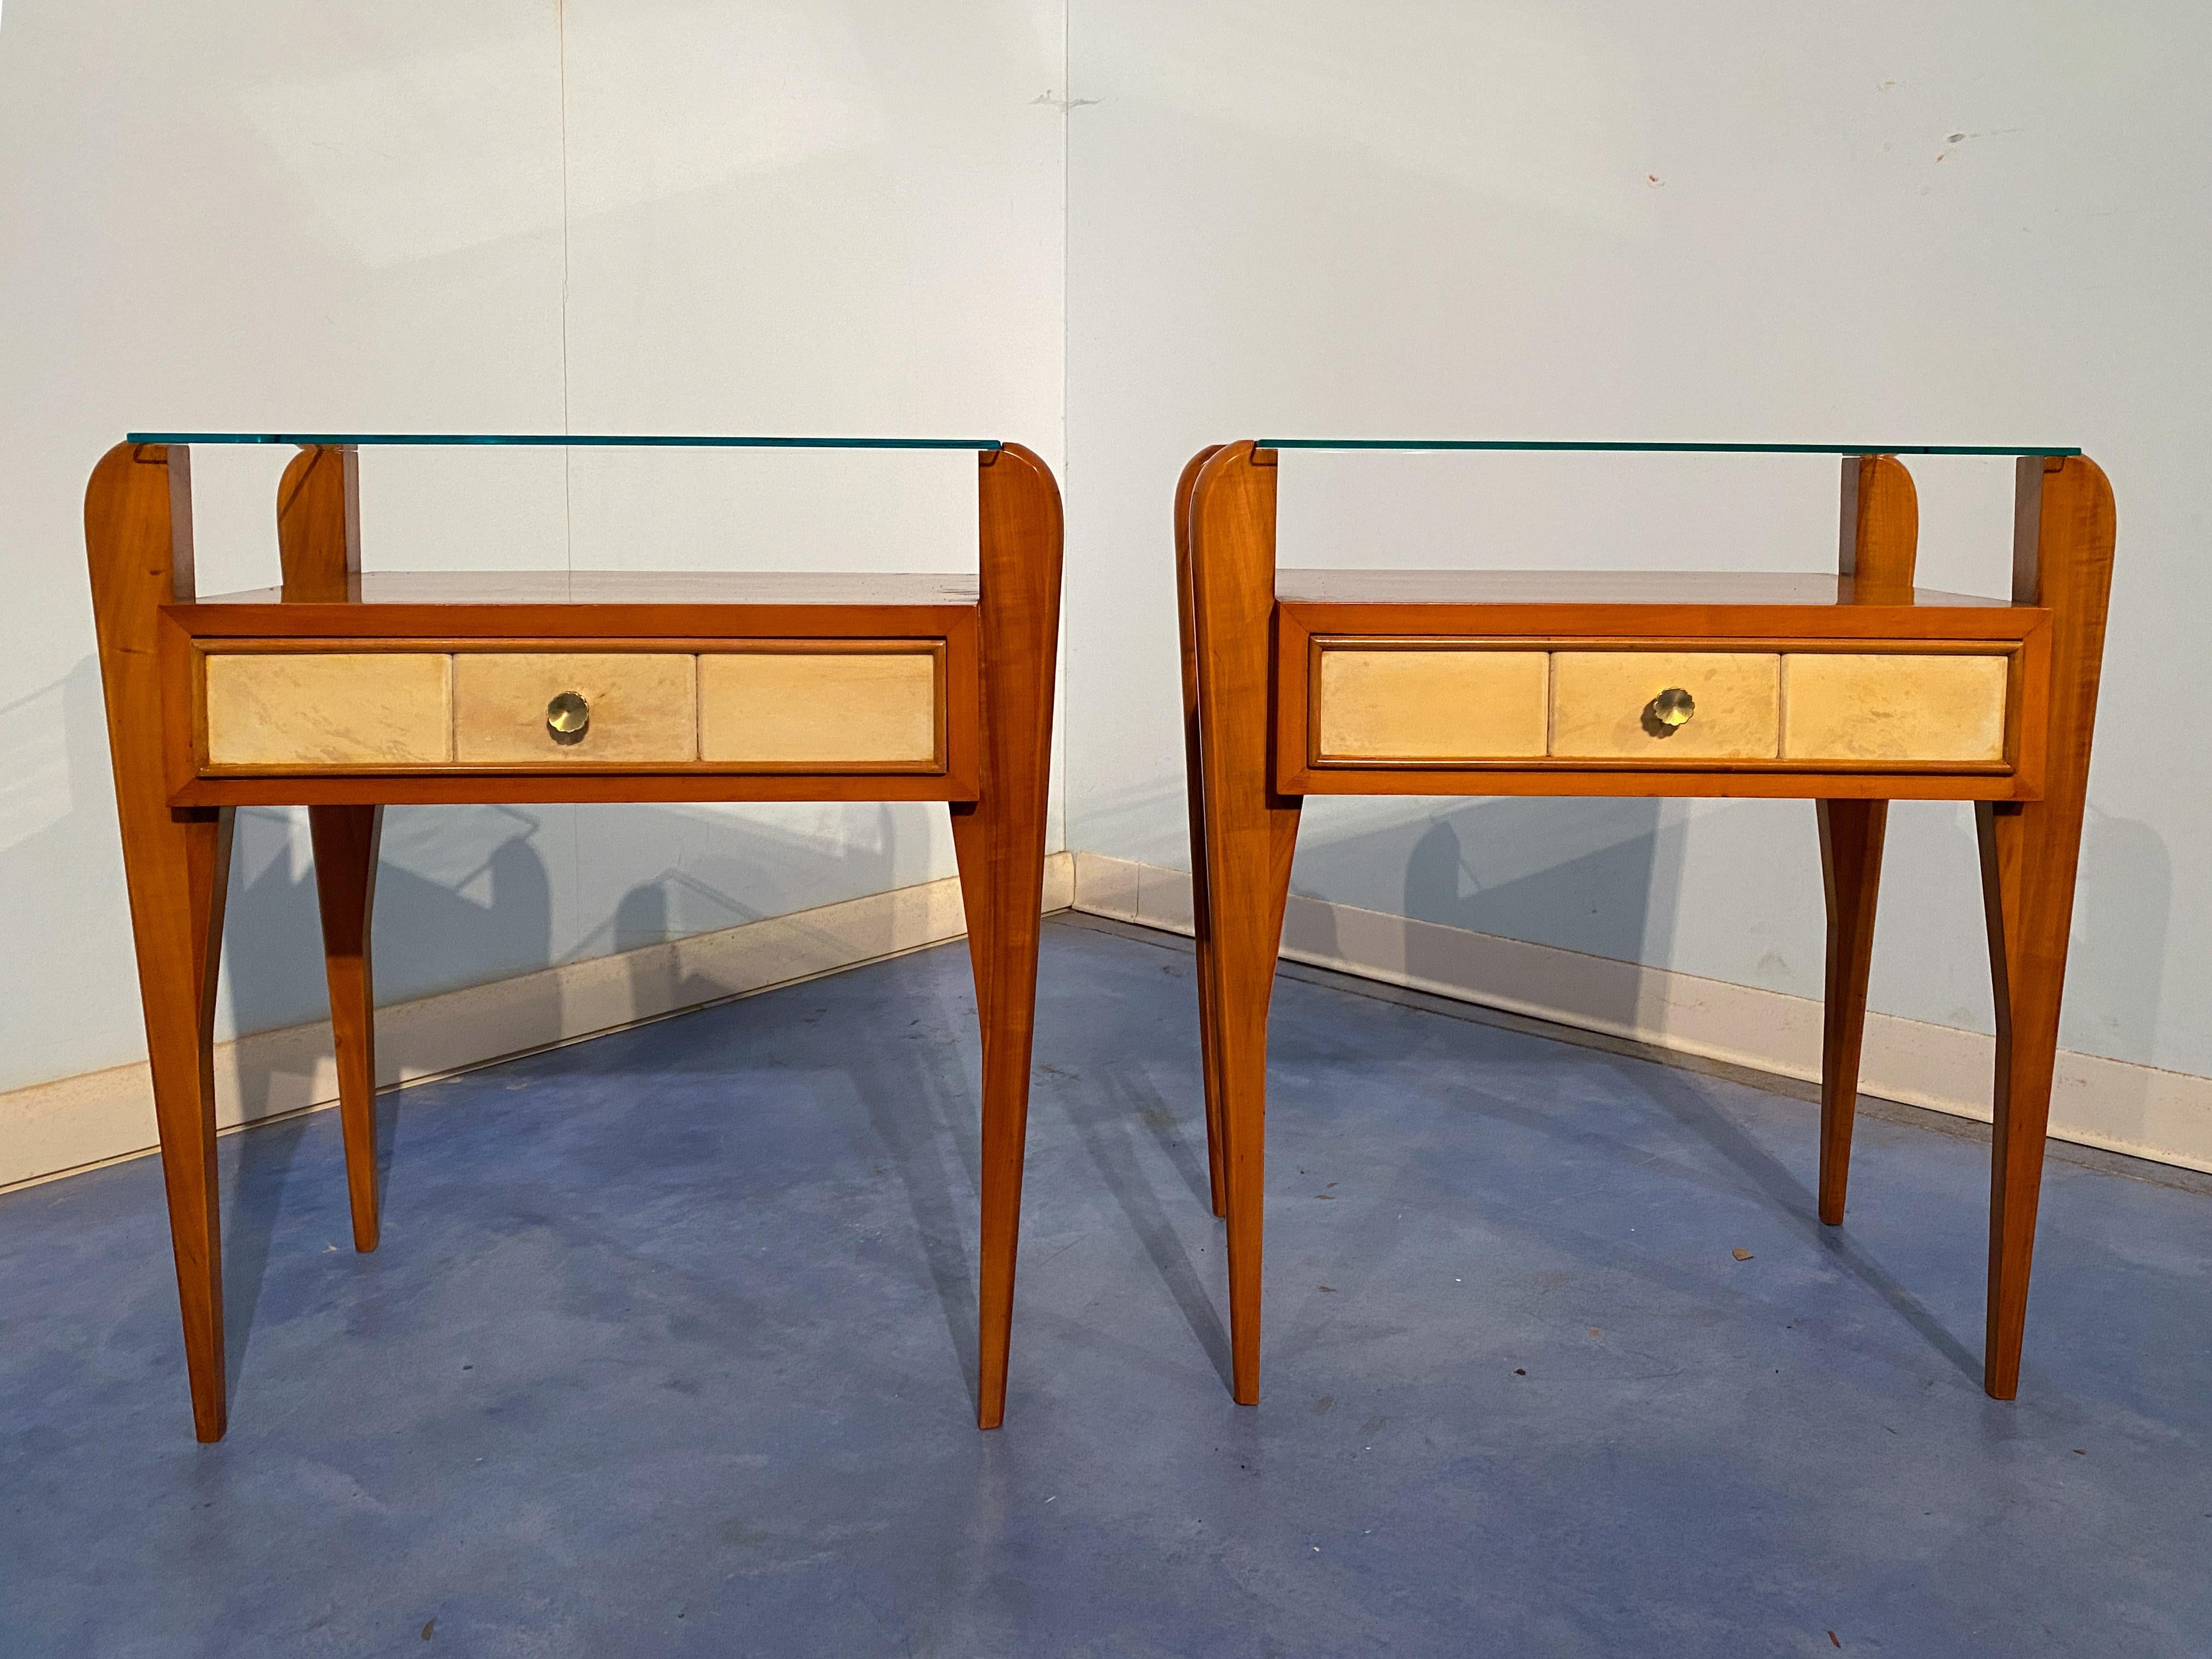 Osvaldo Borsani designed these splendid parchment and cherry bedside tables in the 1950s. The upper shelf is glass, with an elegant and slender design. Drawers are covered in parchment. Original of the period, divided into three sections on the